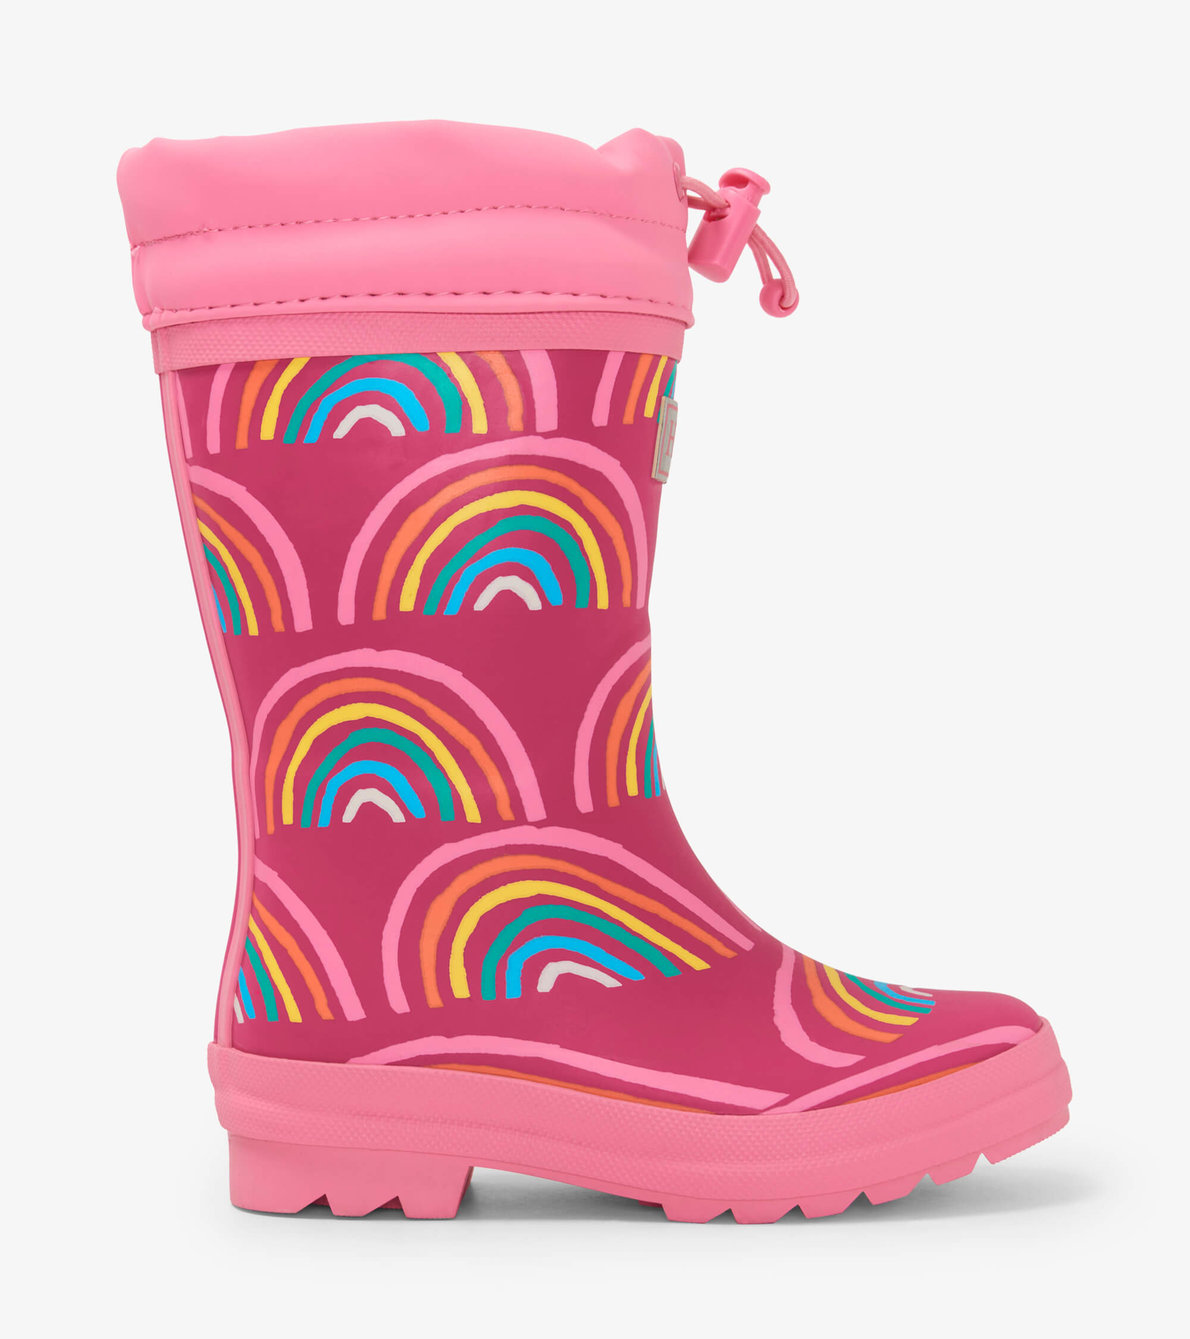 View larger image of Rainy Rainbows Sherpa Lined Wellies